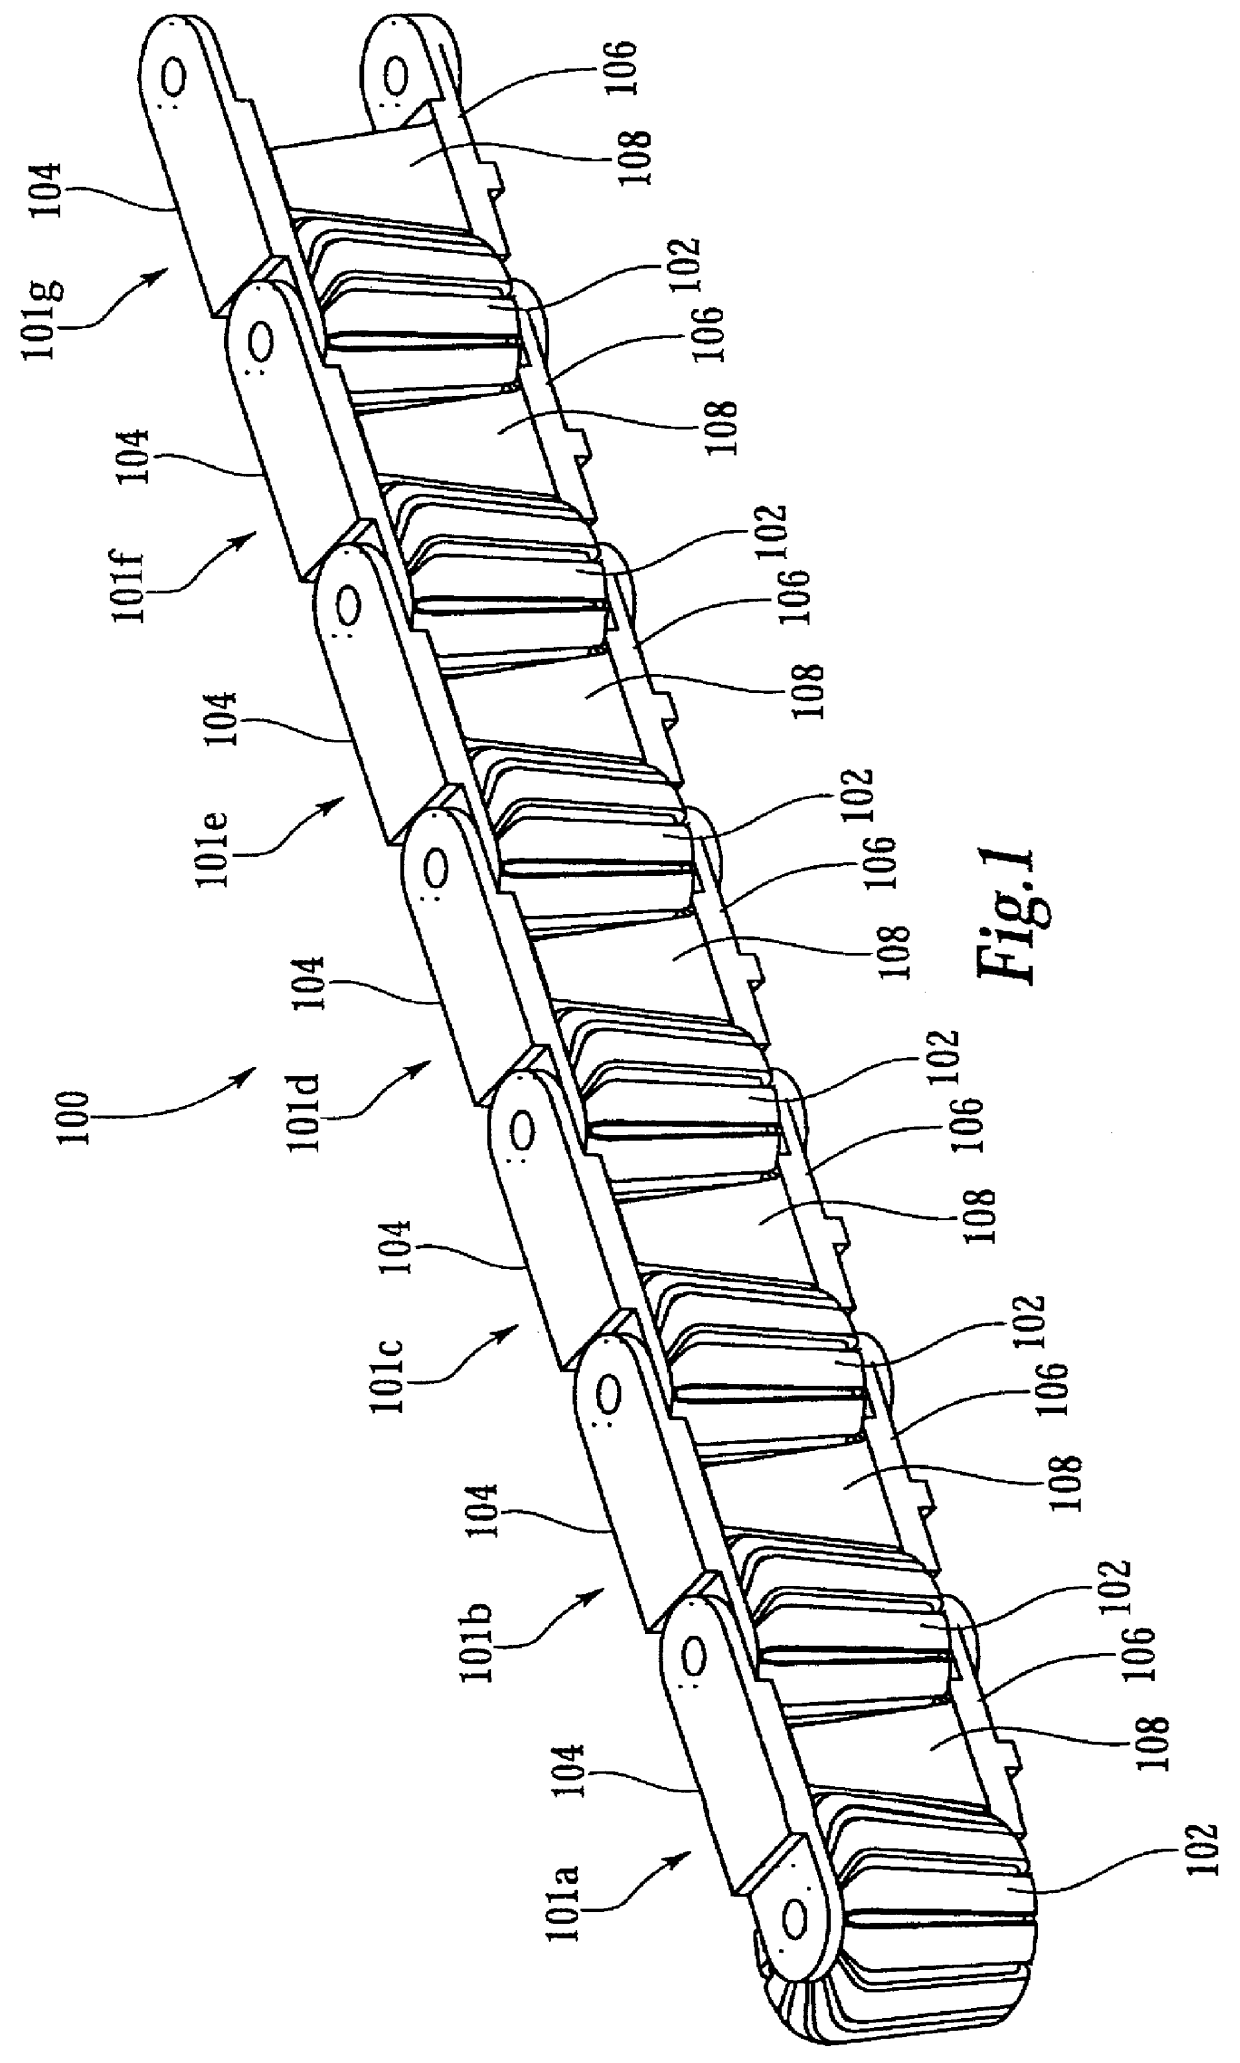 Vehicle barrier system